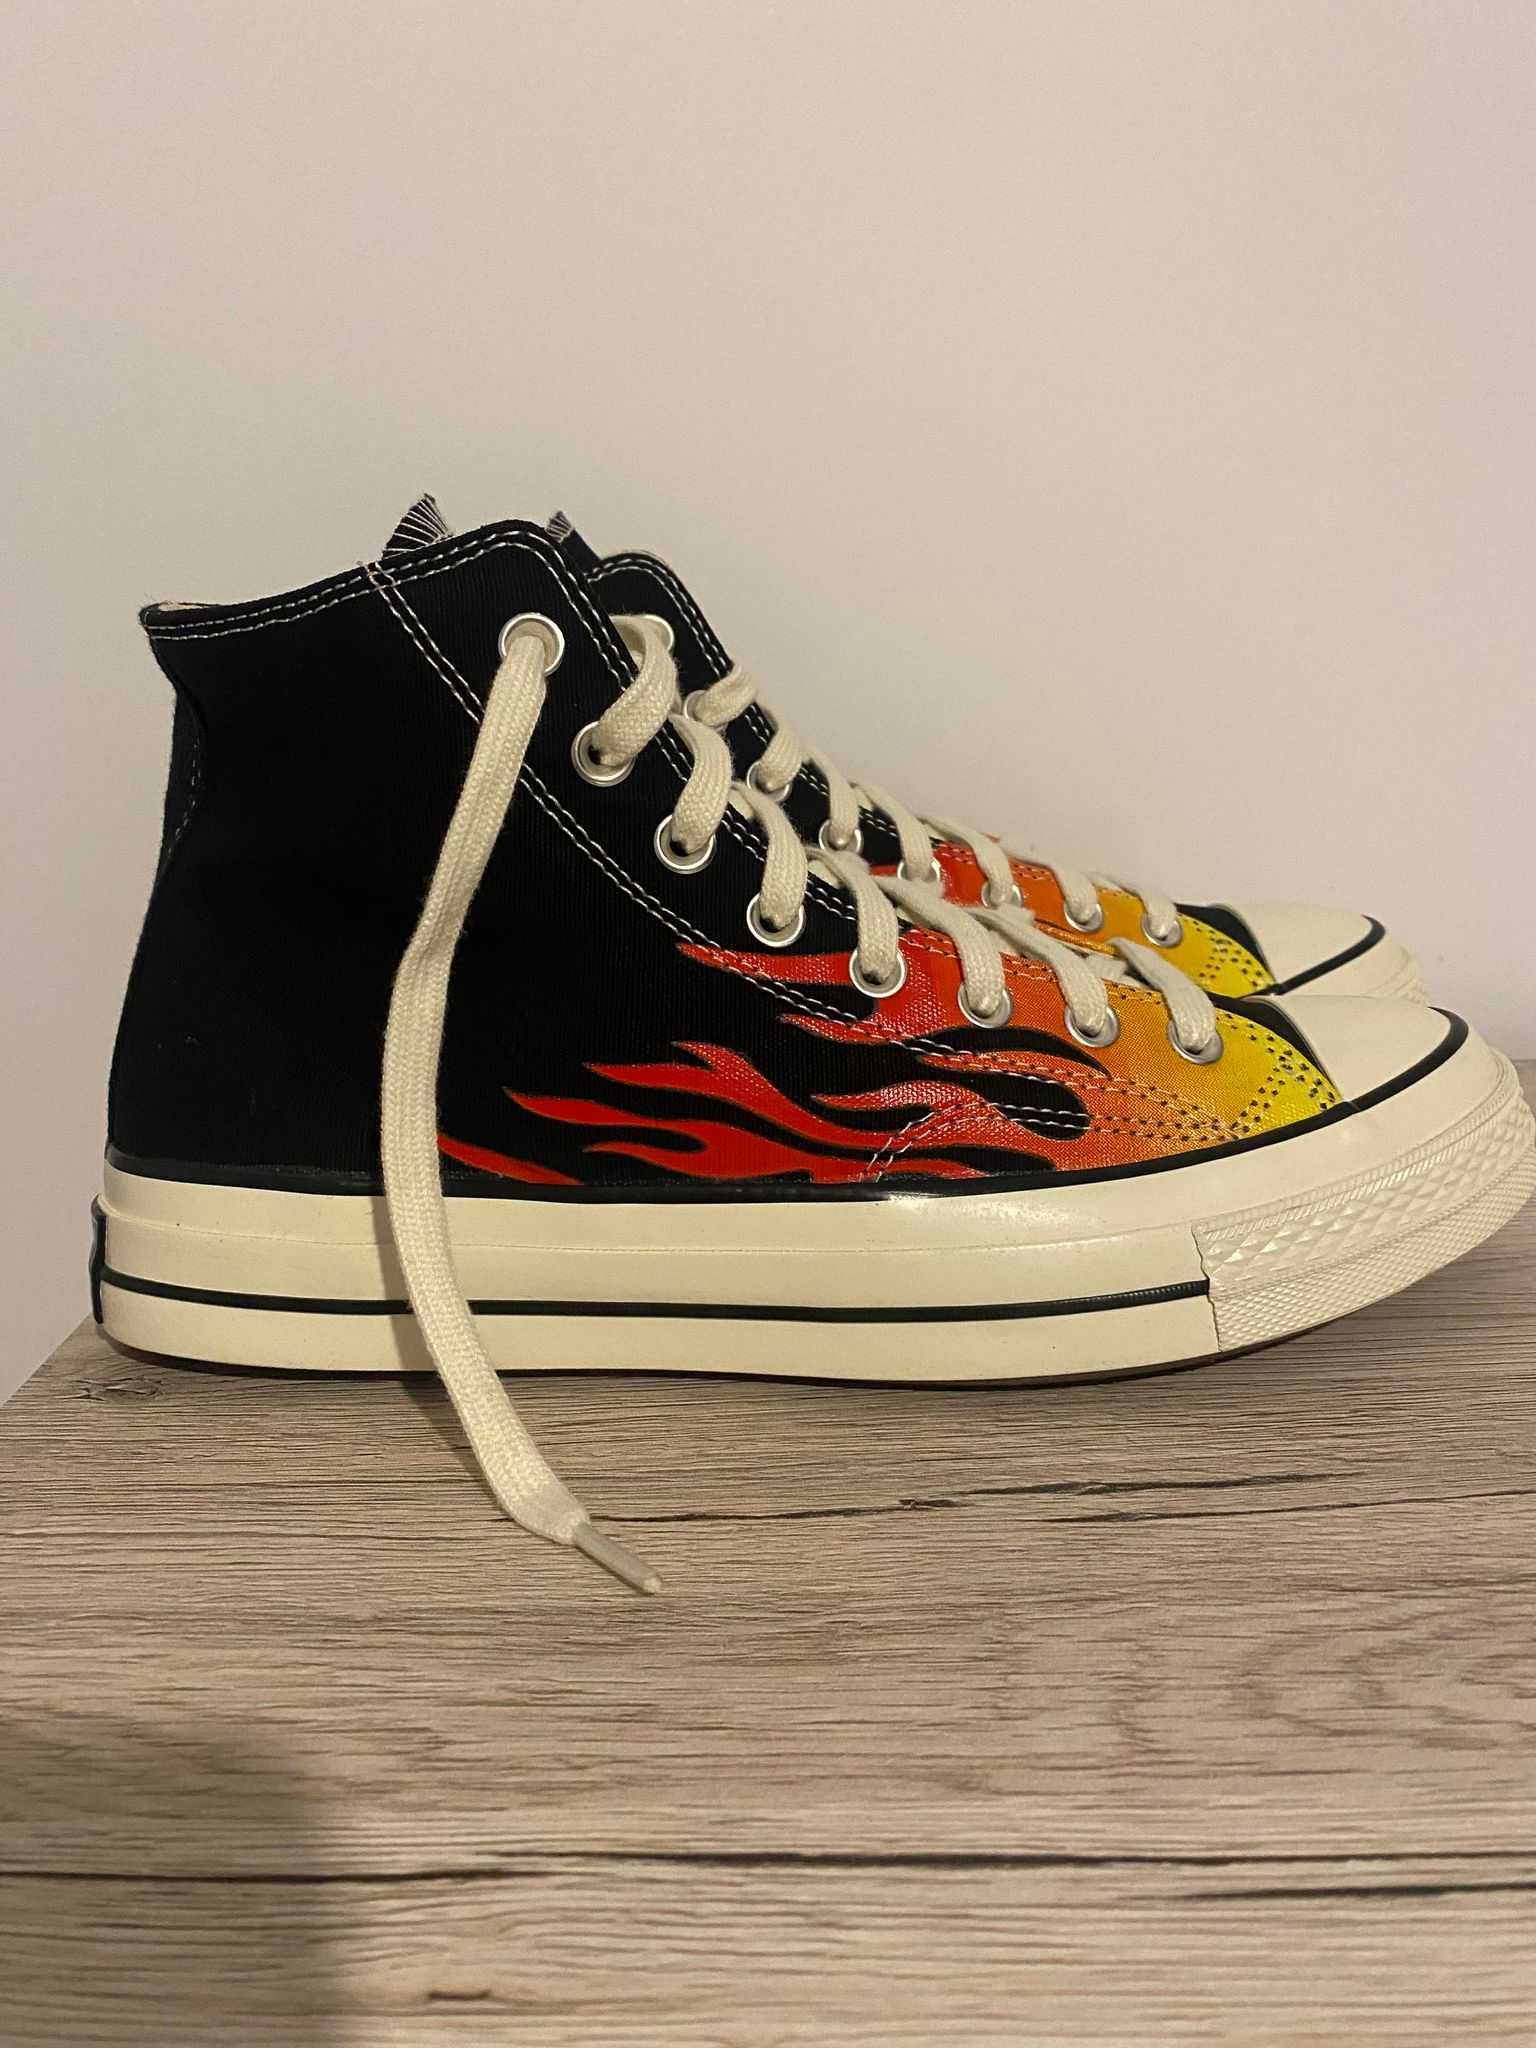 Converse All Star 1970s flame